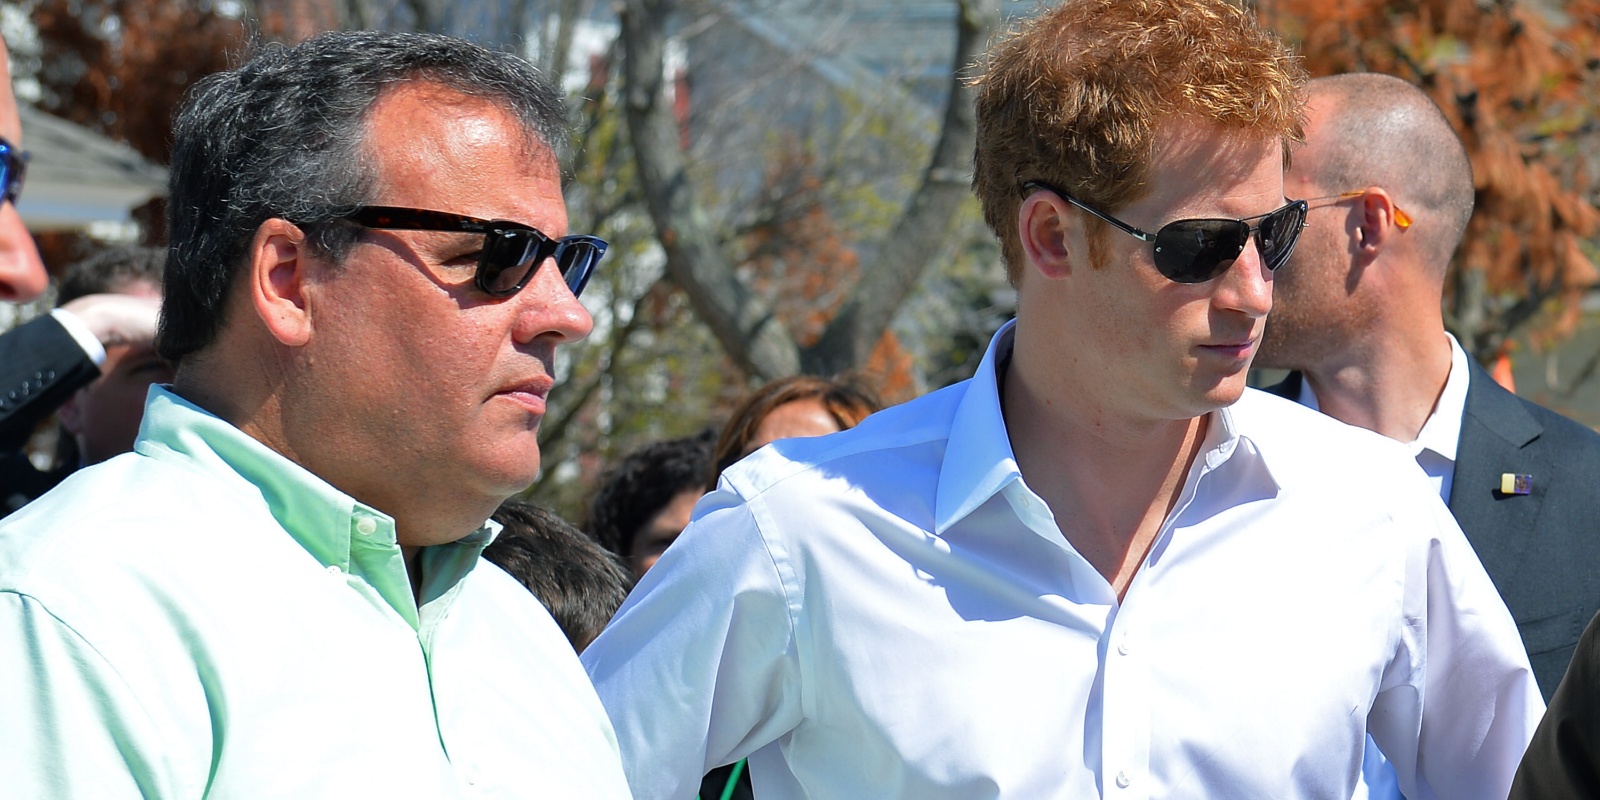 Chris Christie is photographed with Prince Harry on the New Jersey coastline after the he visited to tour the devastation from Superstorm Sandy in 2012.